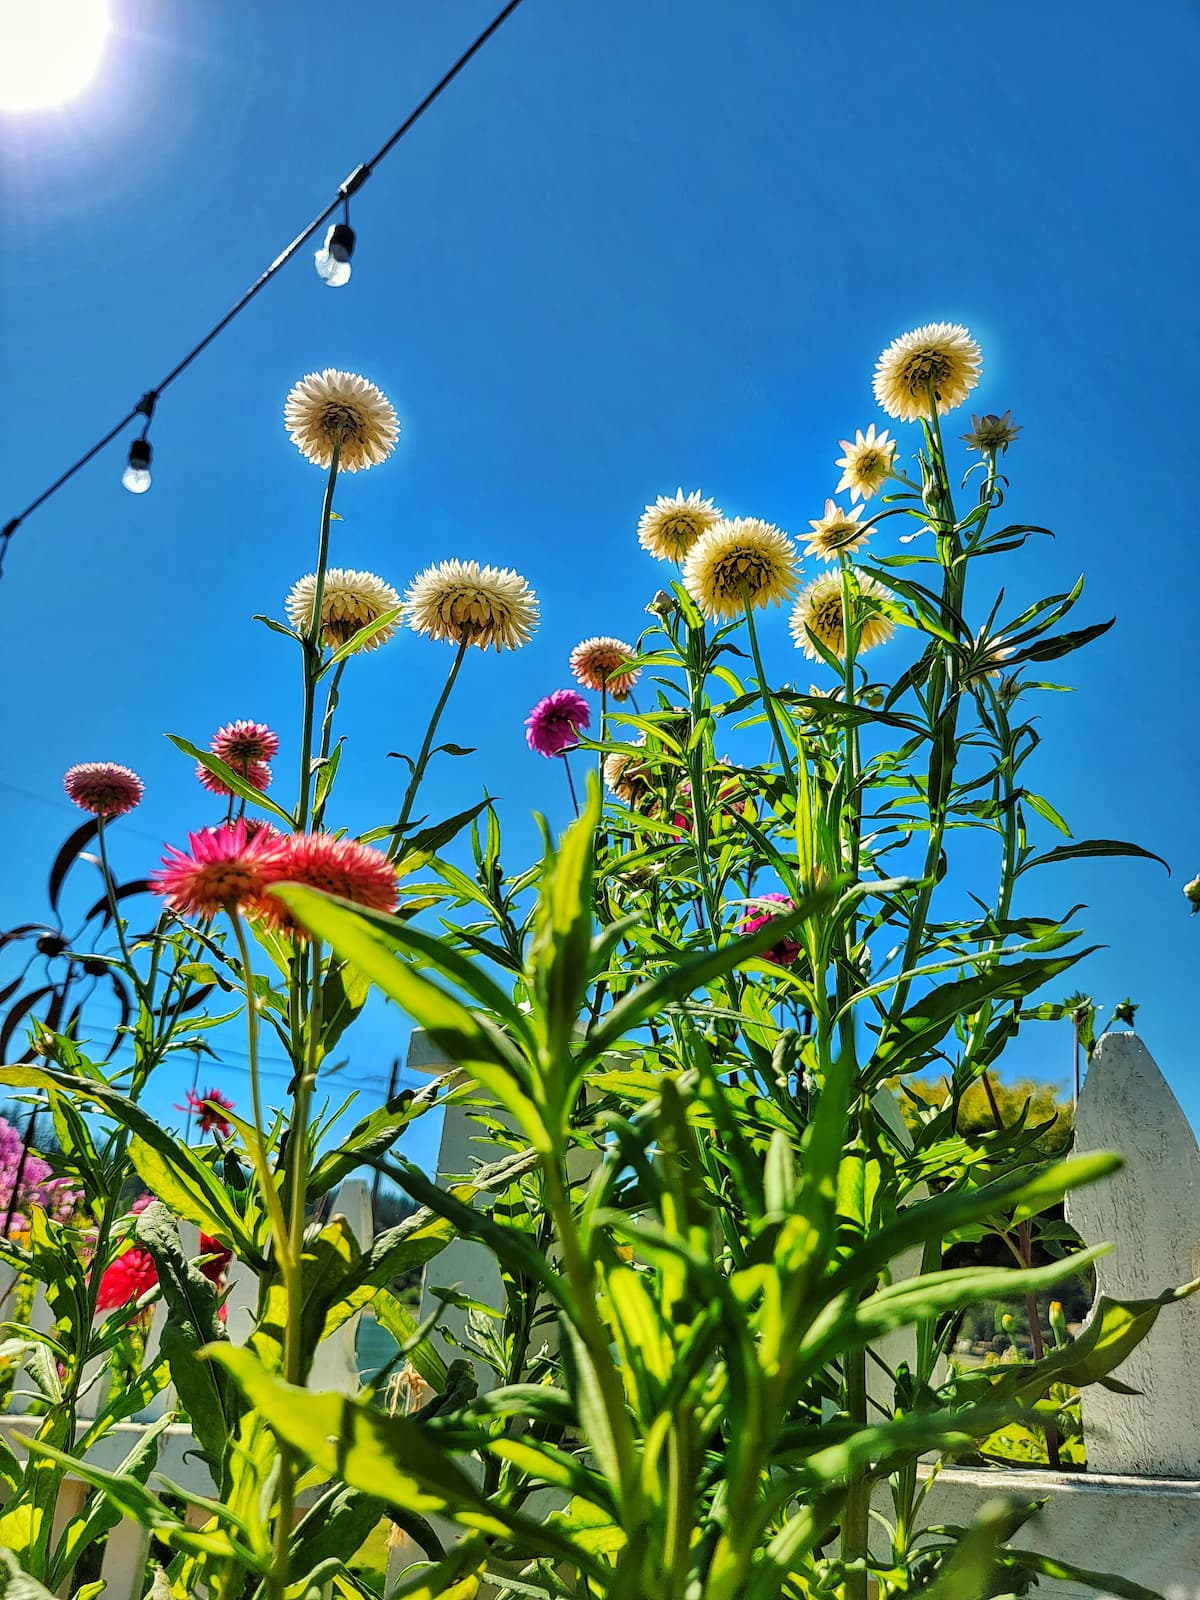 https://shiplapandshells.com/wp-content/uploads/2023/04/view-of-strawflowers-looking-up-at-the-sky-SQ-1200.jpg